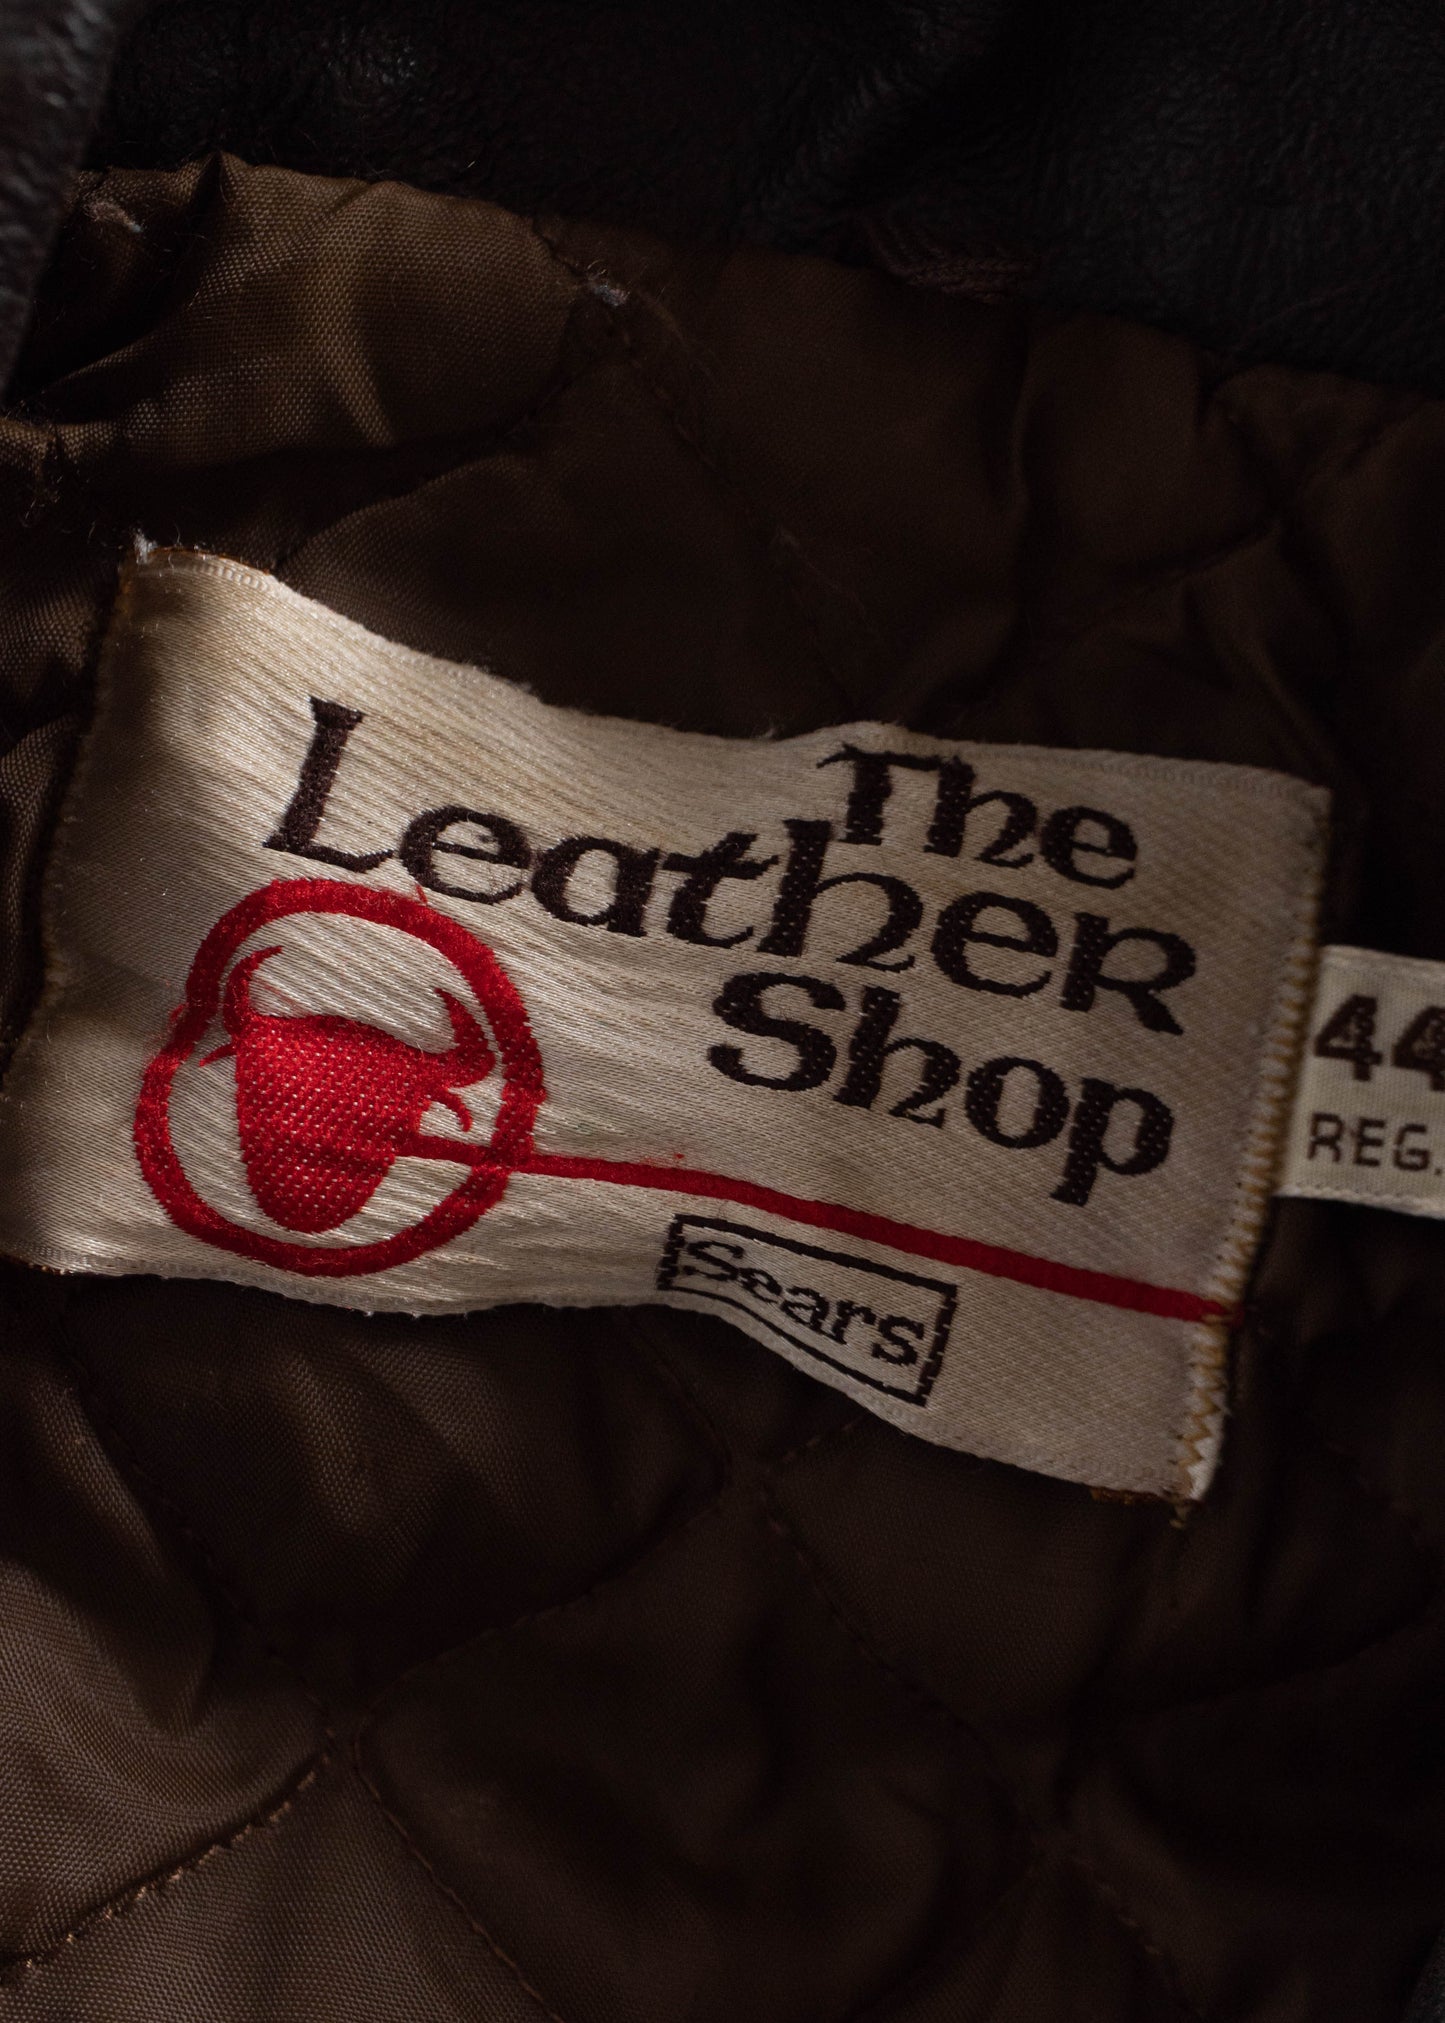 1980s Sears The Leather Shop Bomber Jacket Size L/XL